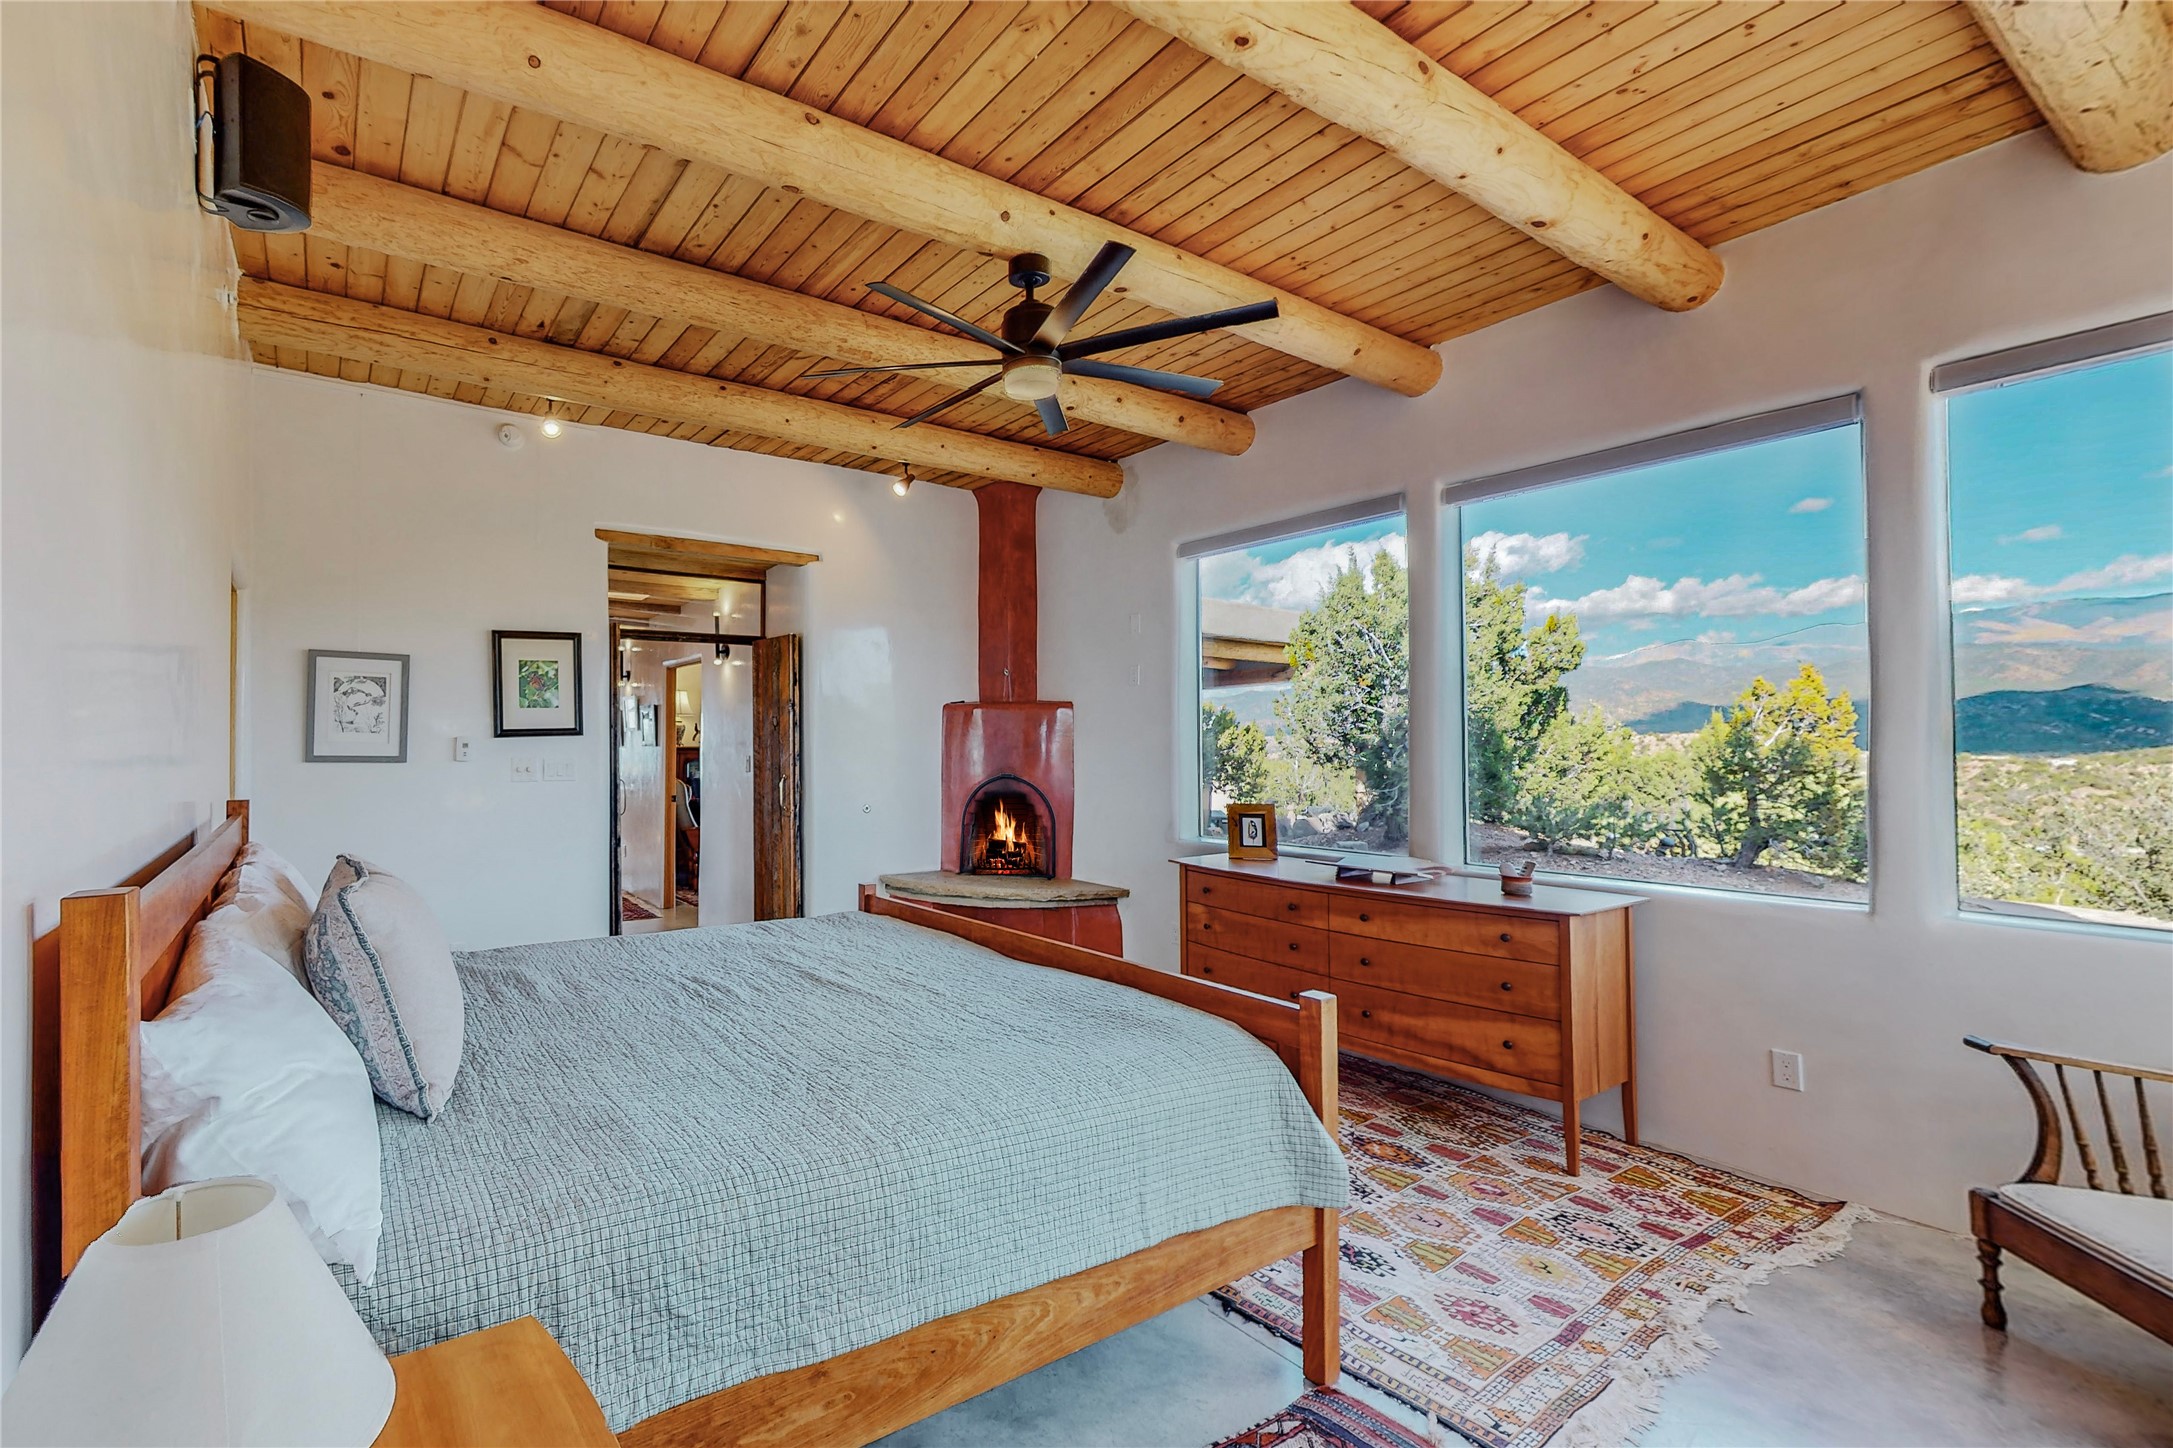 Primary bedroom with wood burning kiva and epic views